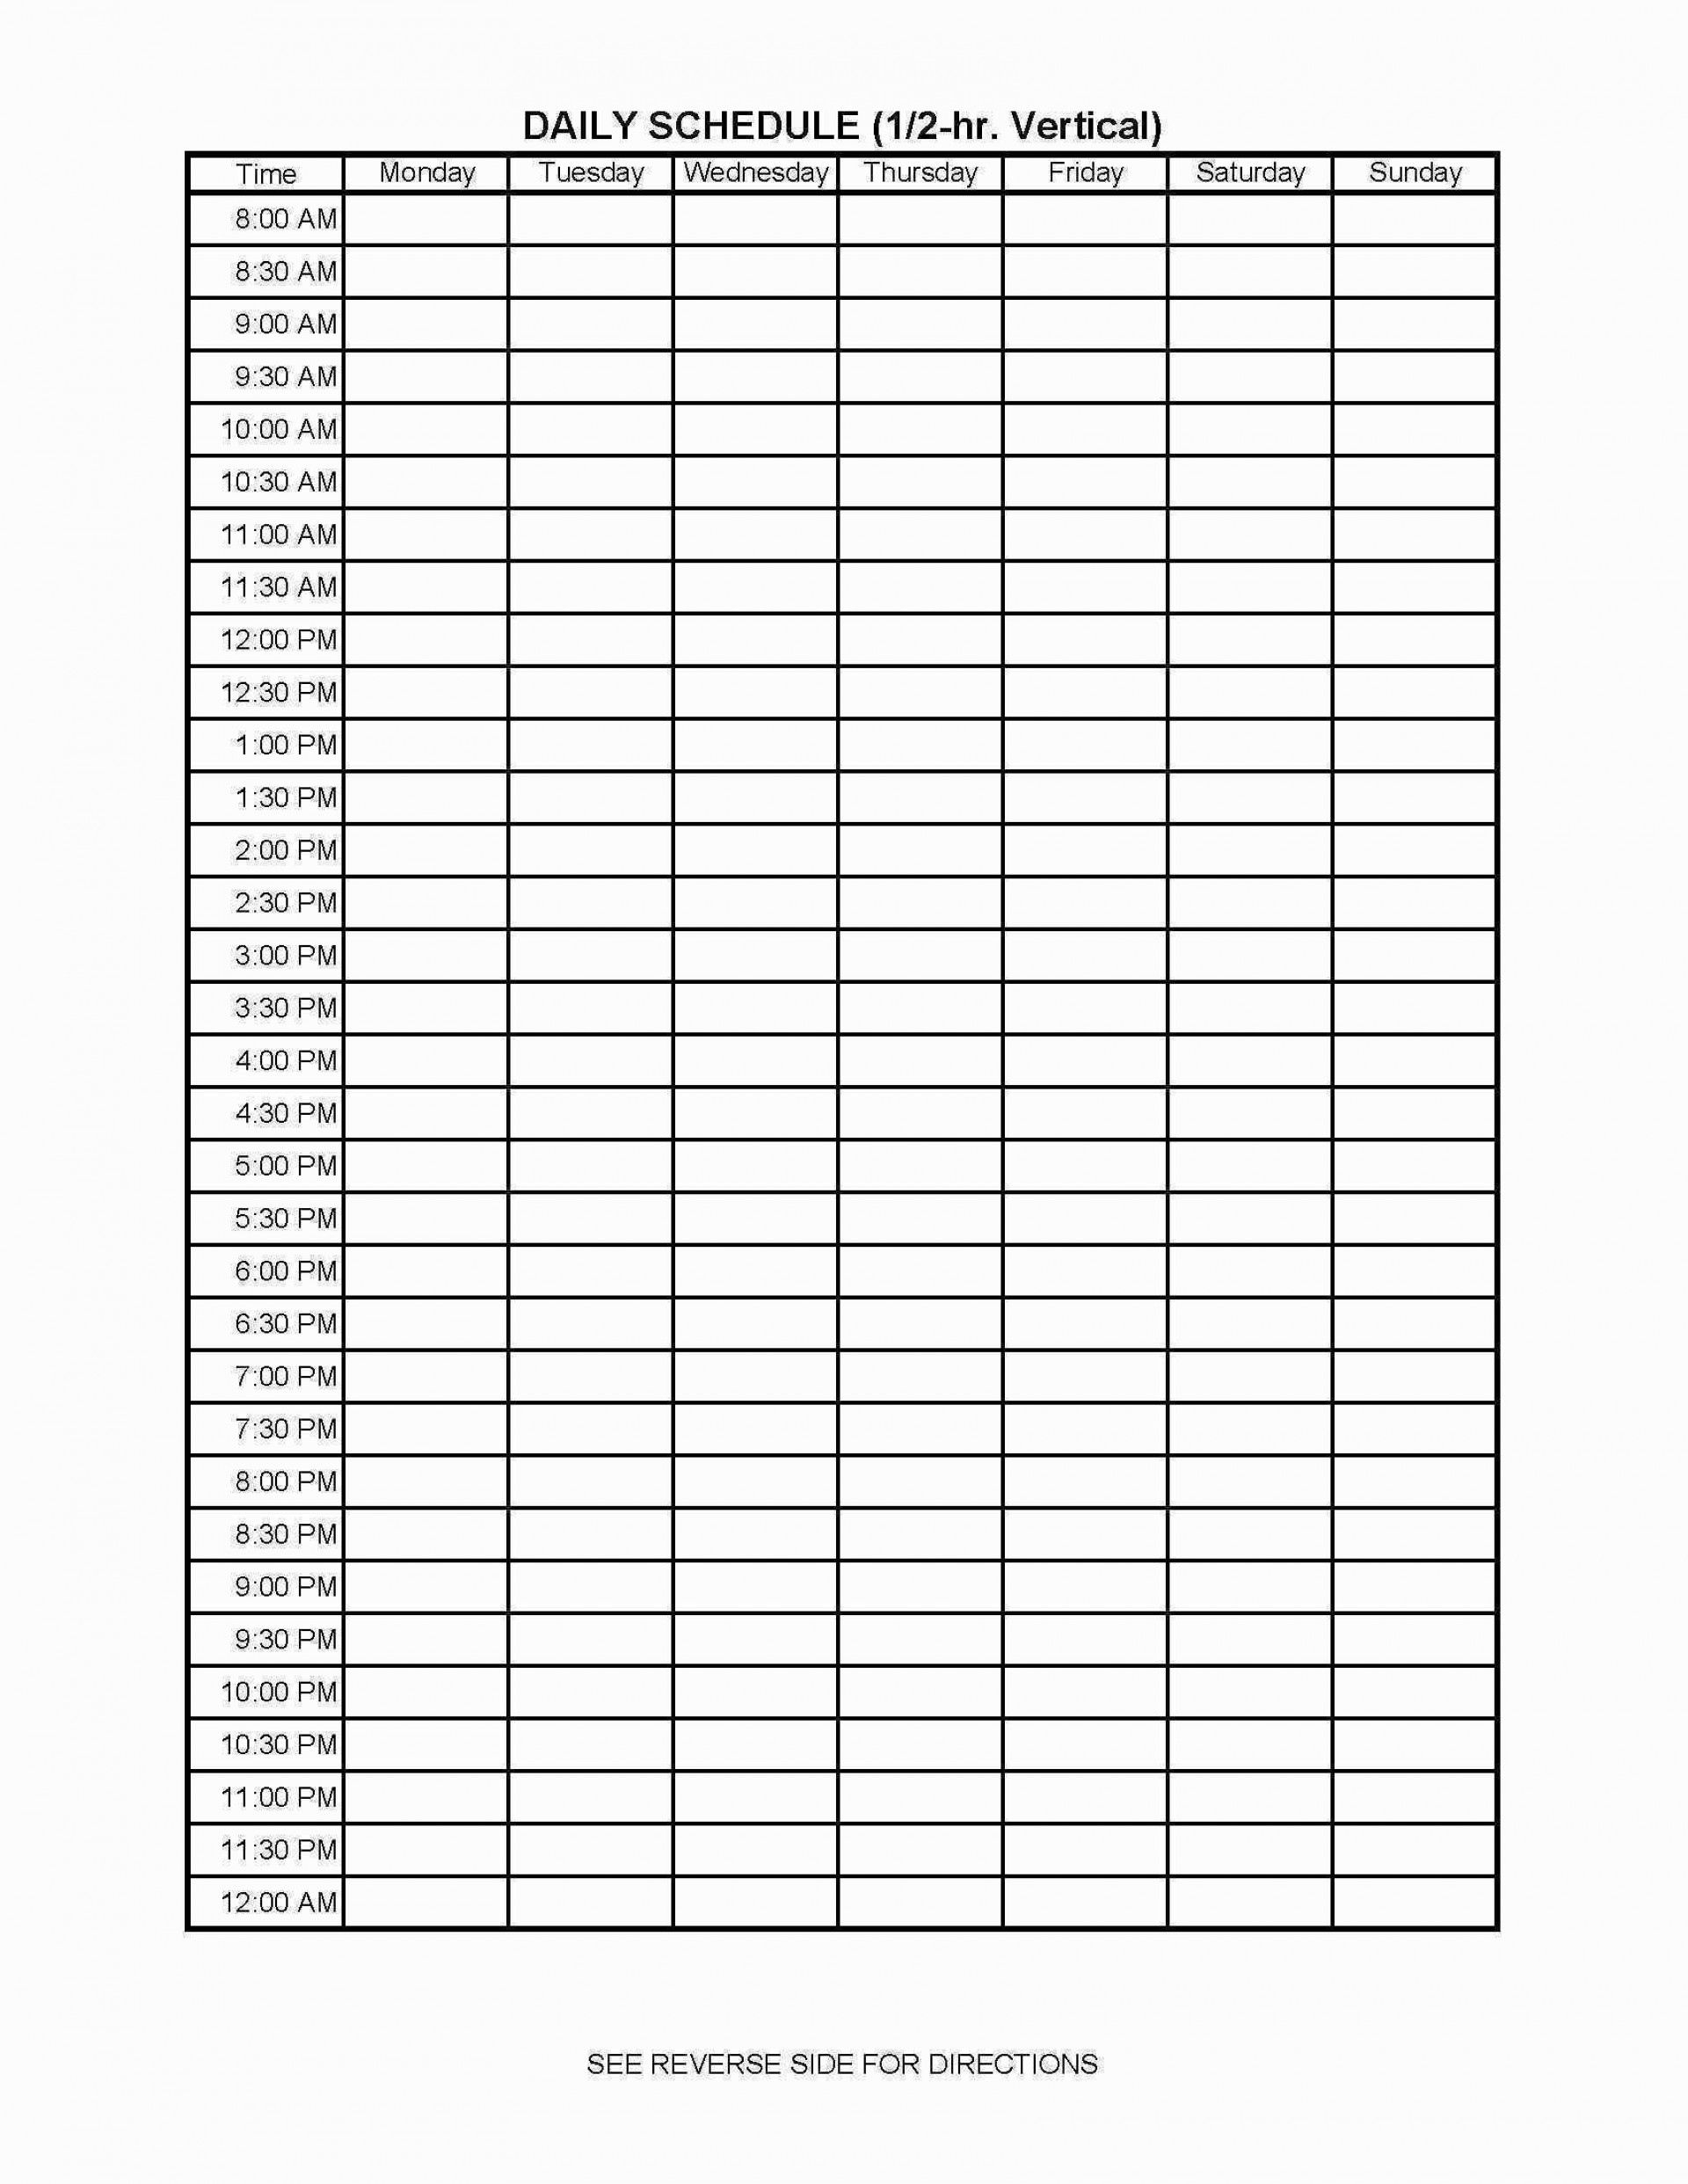 Exceptional Blank Schedule Template 7 Day 24 Hours pertaining to Blank Schedule With Hourly Counter